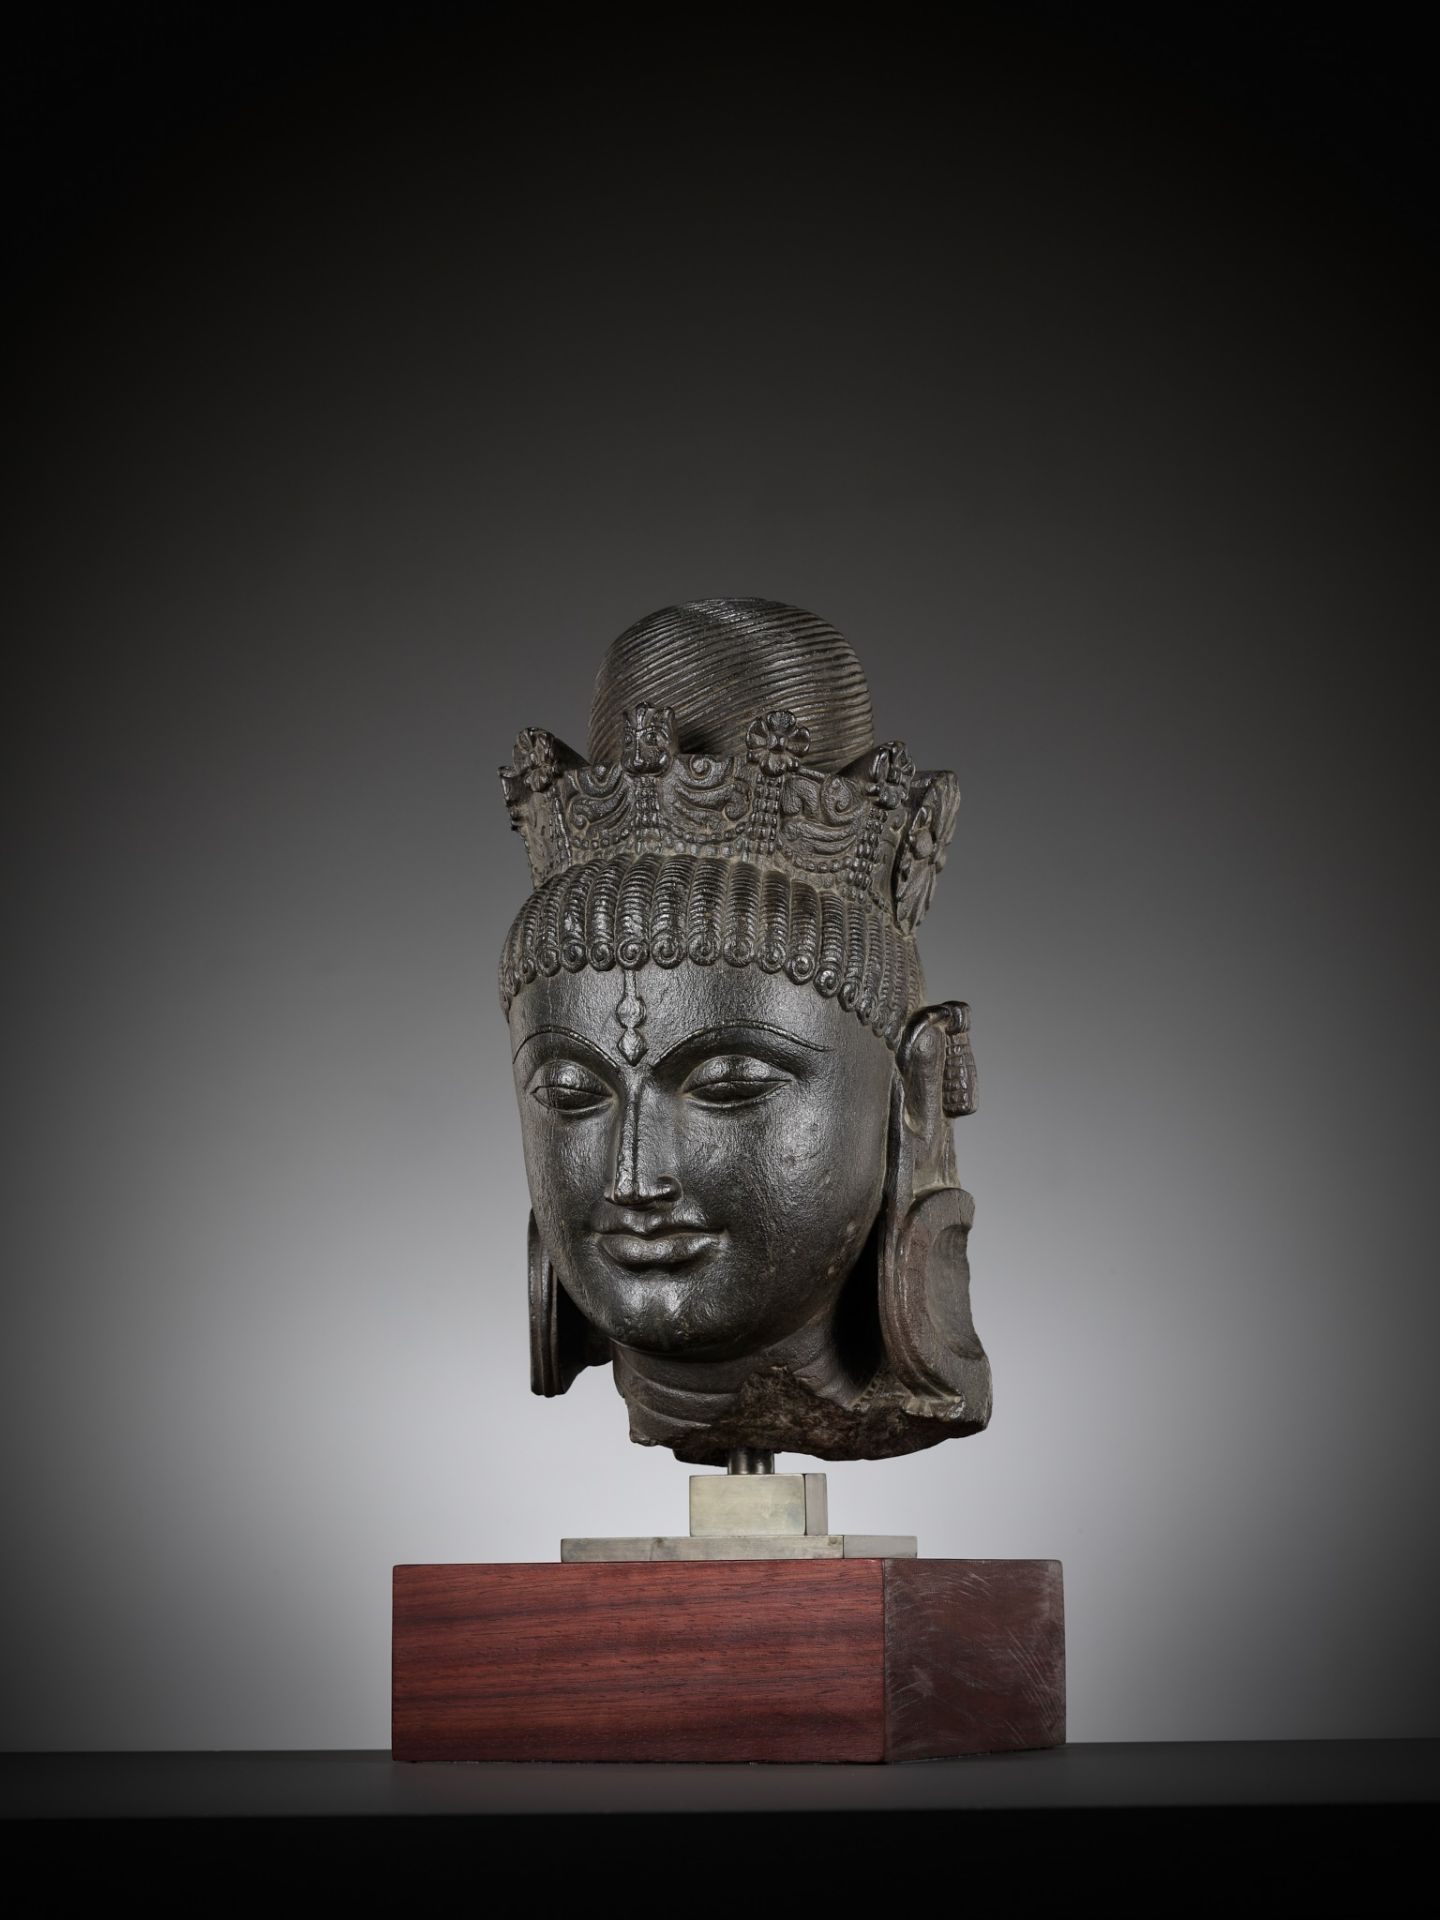 AN IMPORTANT AND MONUMENTAL BLACK STONE HEAD OF TARA, PALA PERIOD - Image 9 of 15